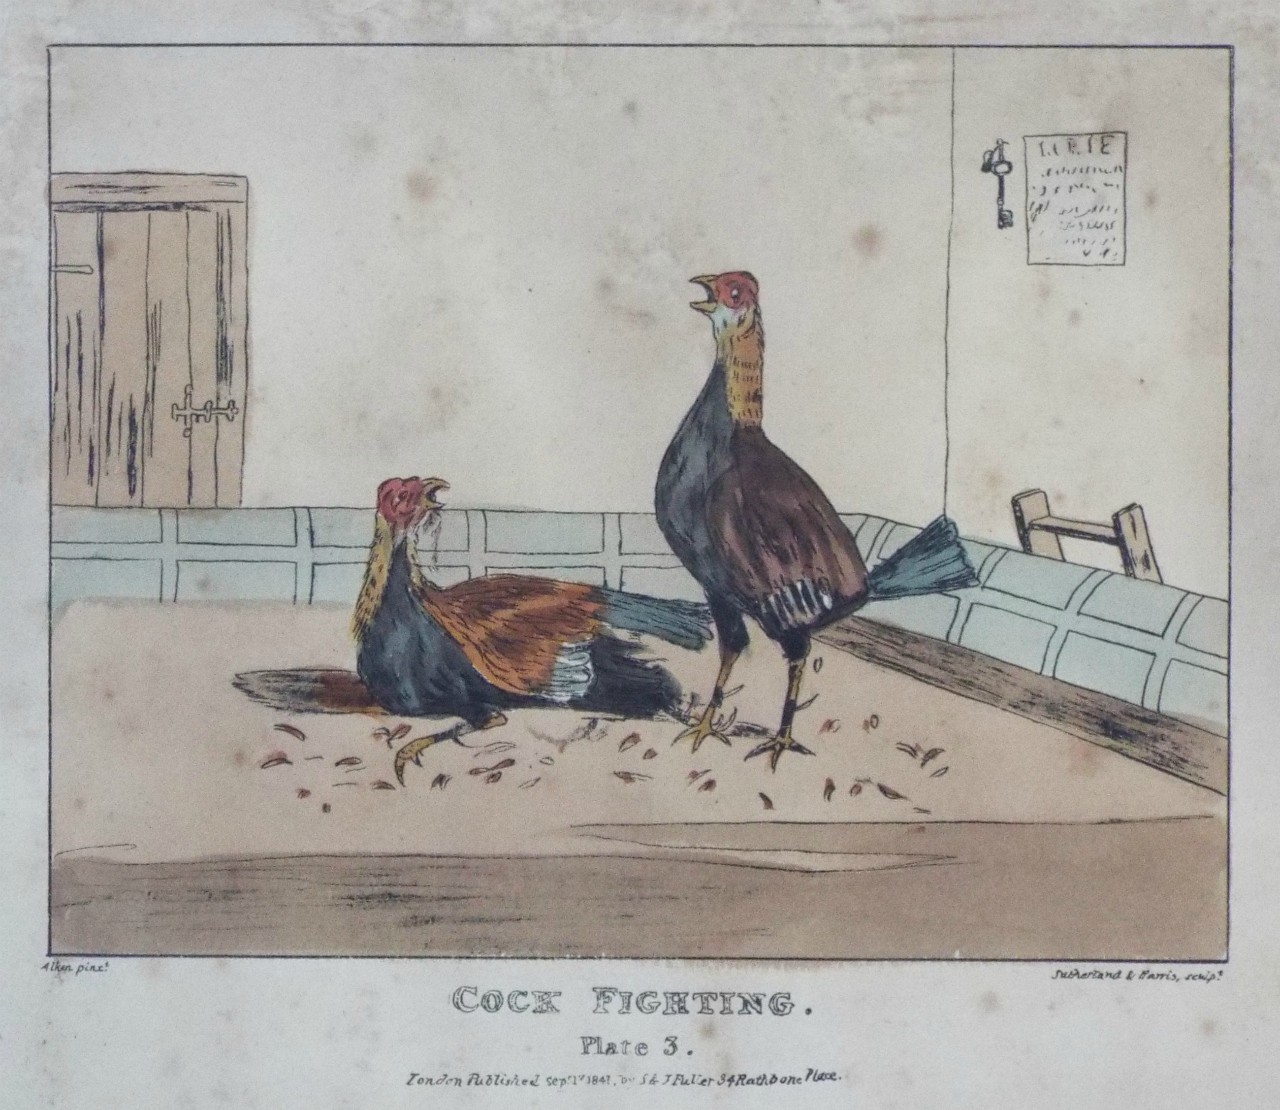 Lithograph - 4 Cock Fighting Plate 3. - Sutherland